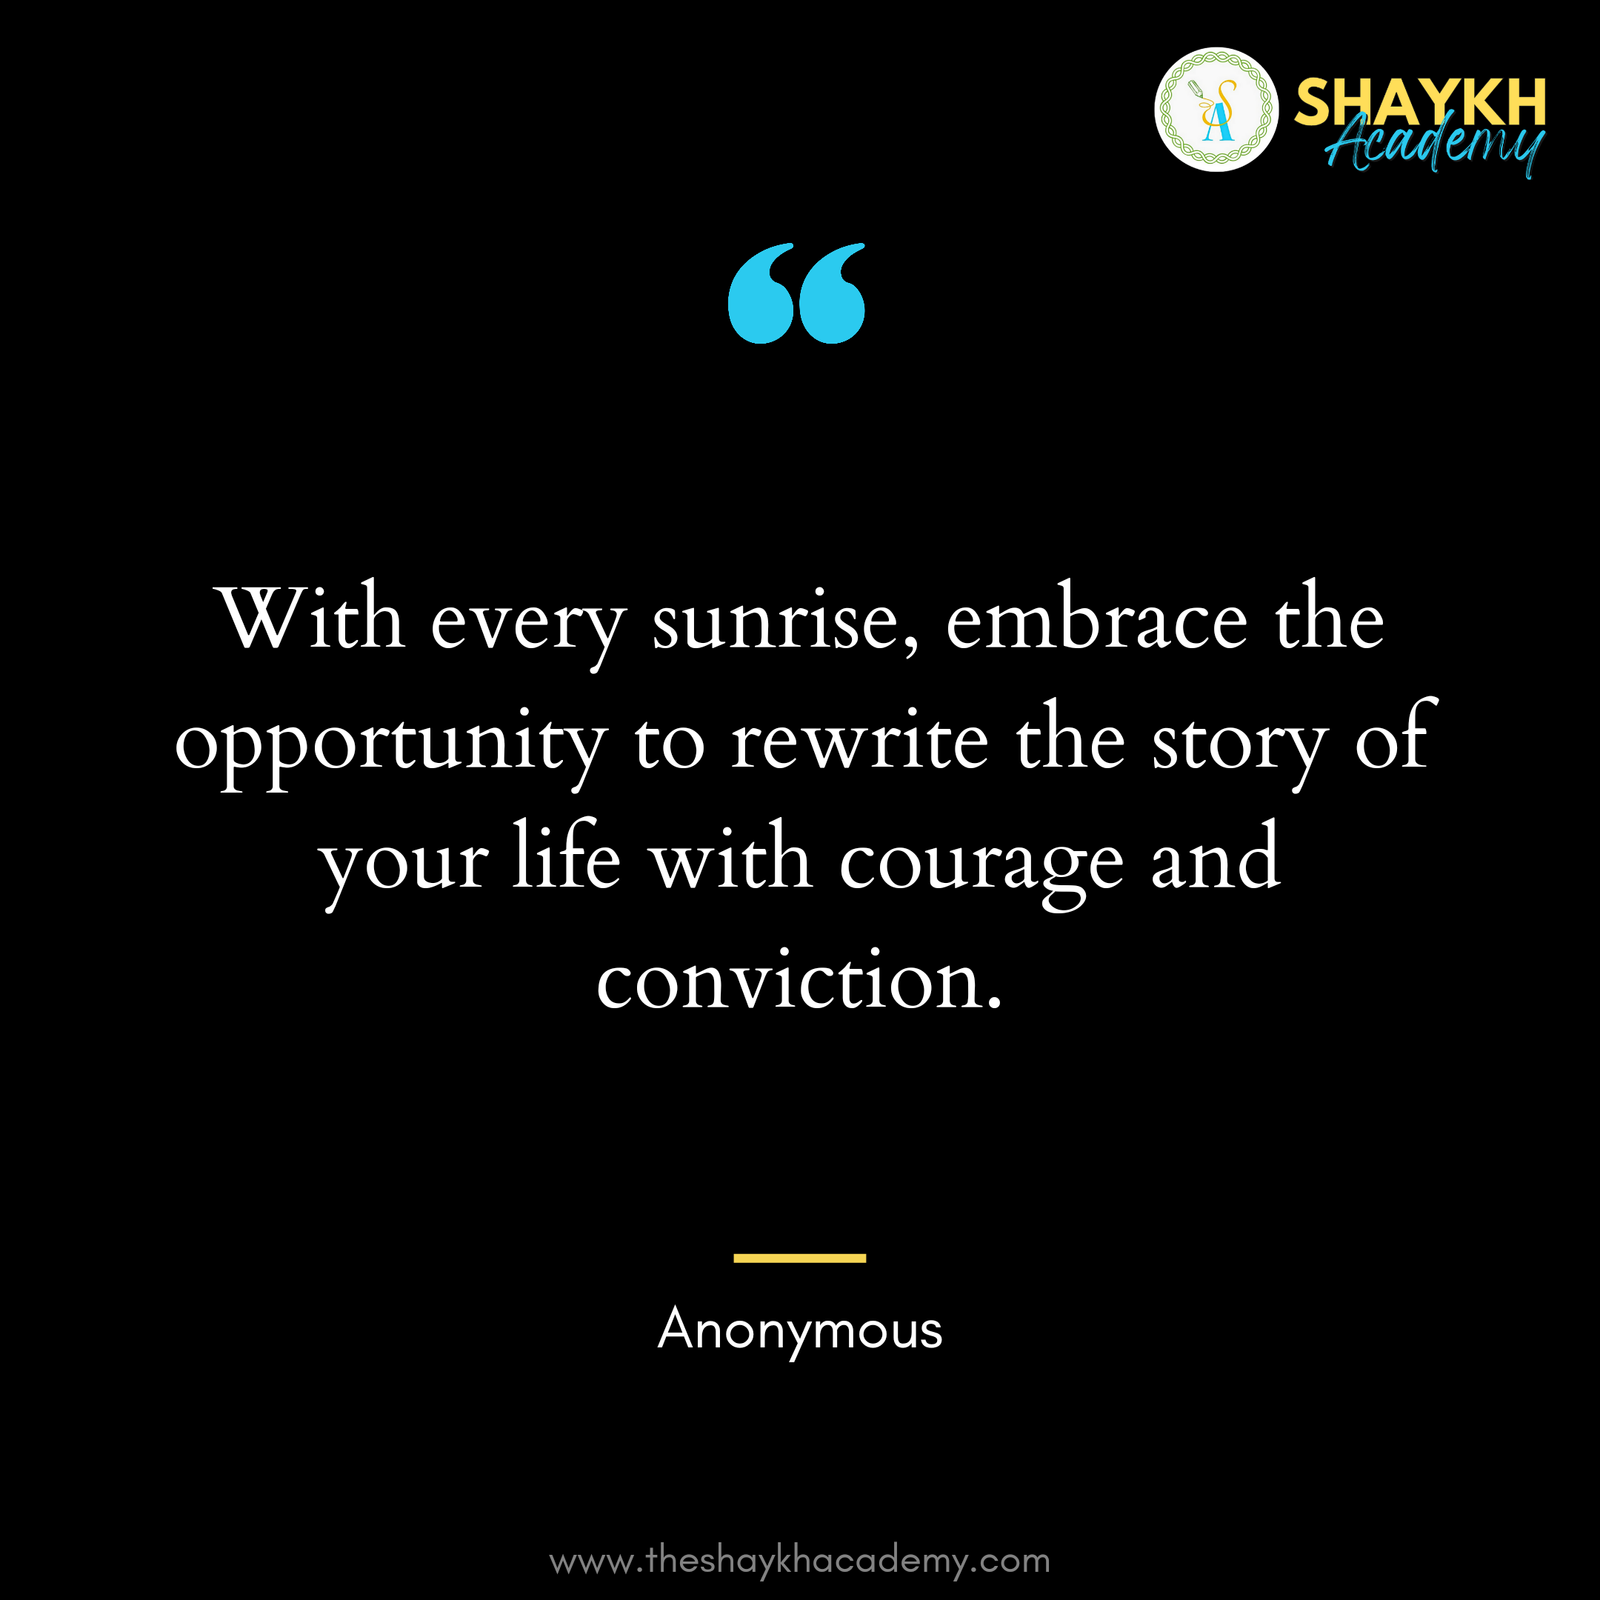 With every sunrise, embrace the opportunity to rewrite the story of your life with courage and conviction.